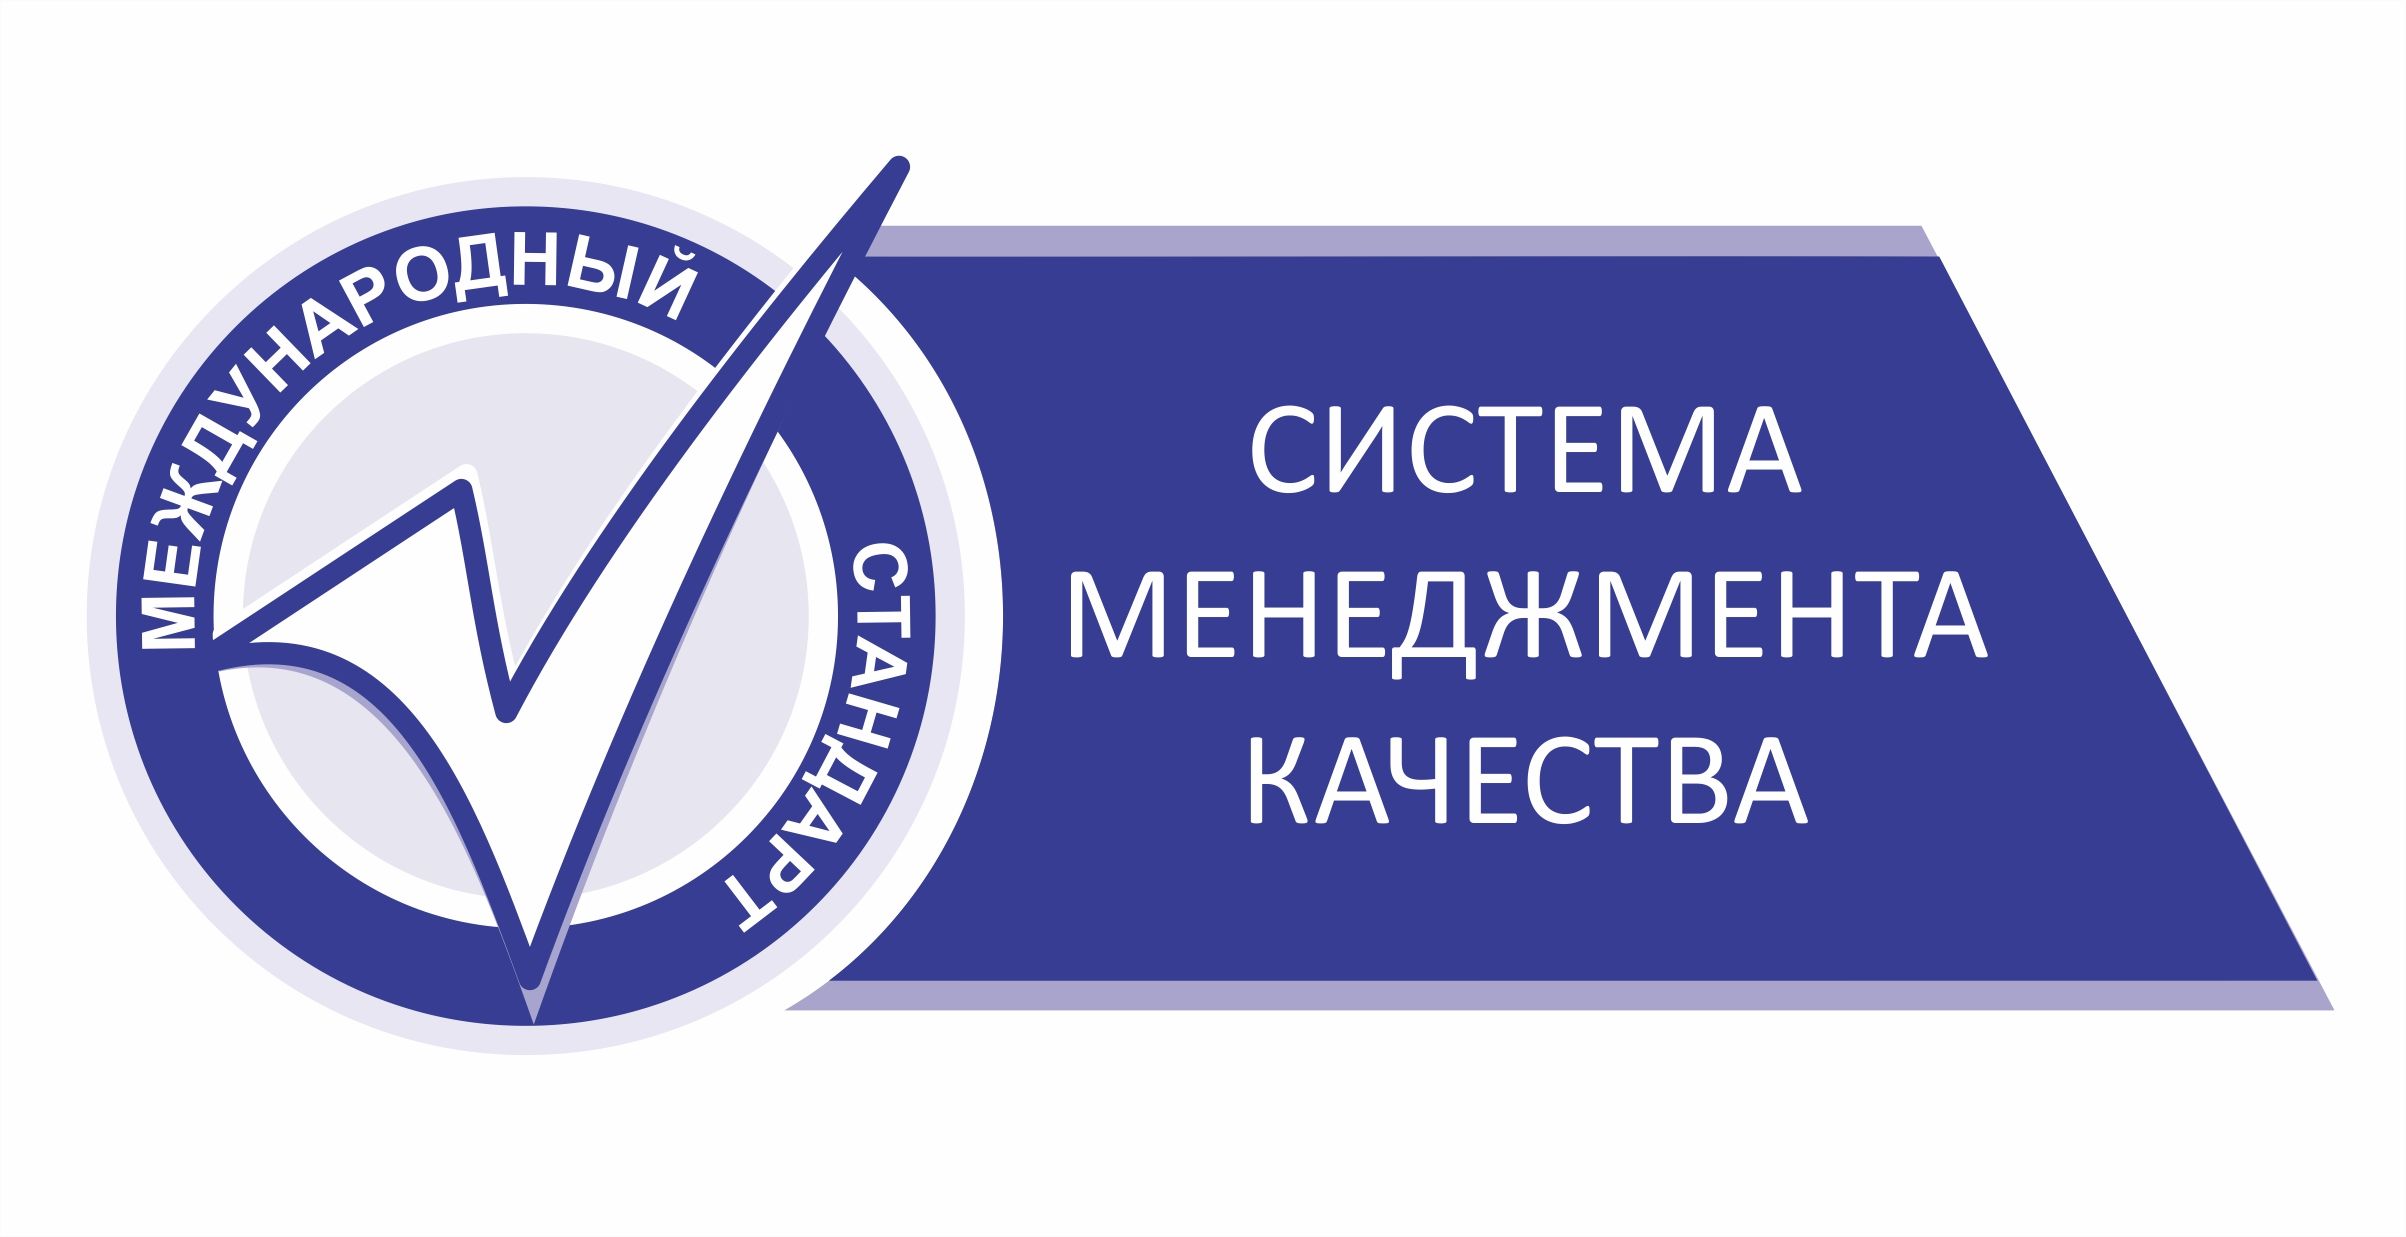 Aviation academy has been issued a certificate of conformity